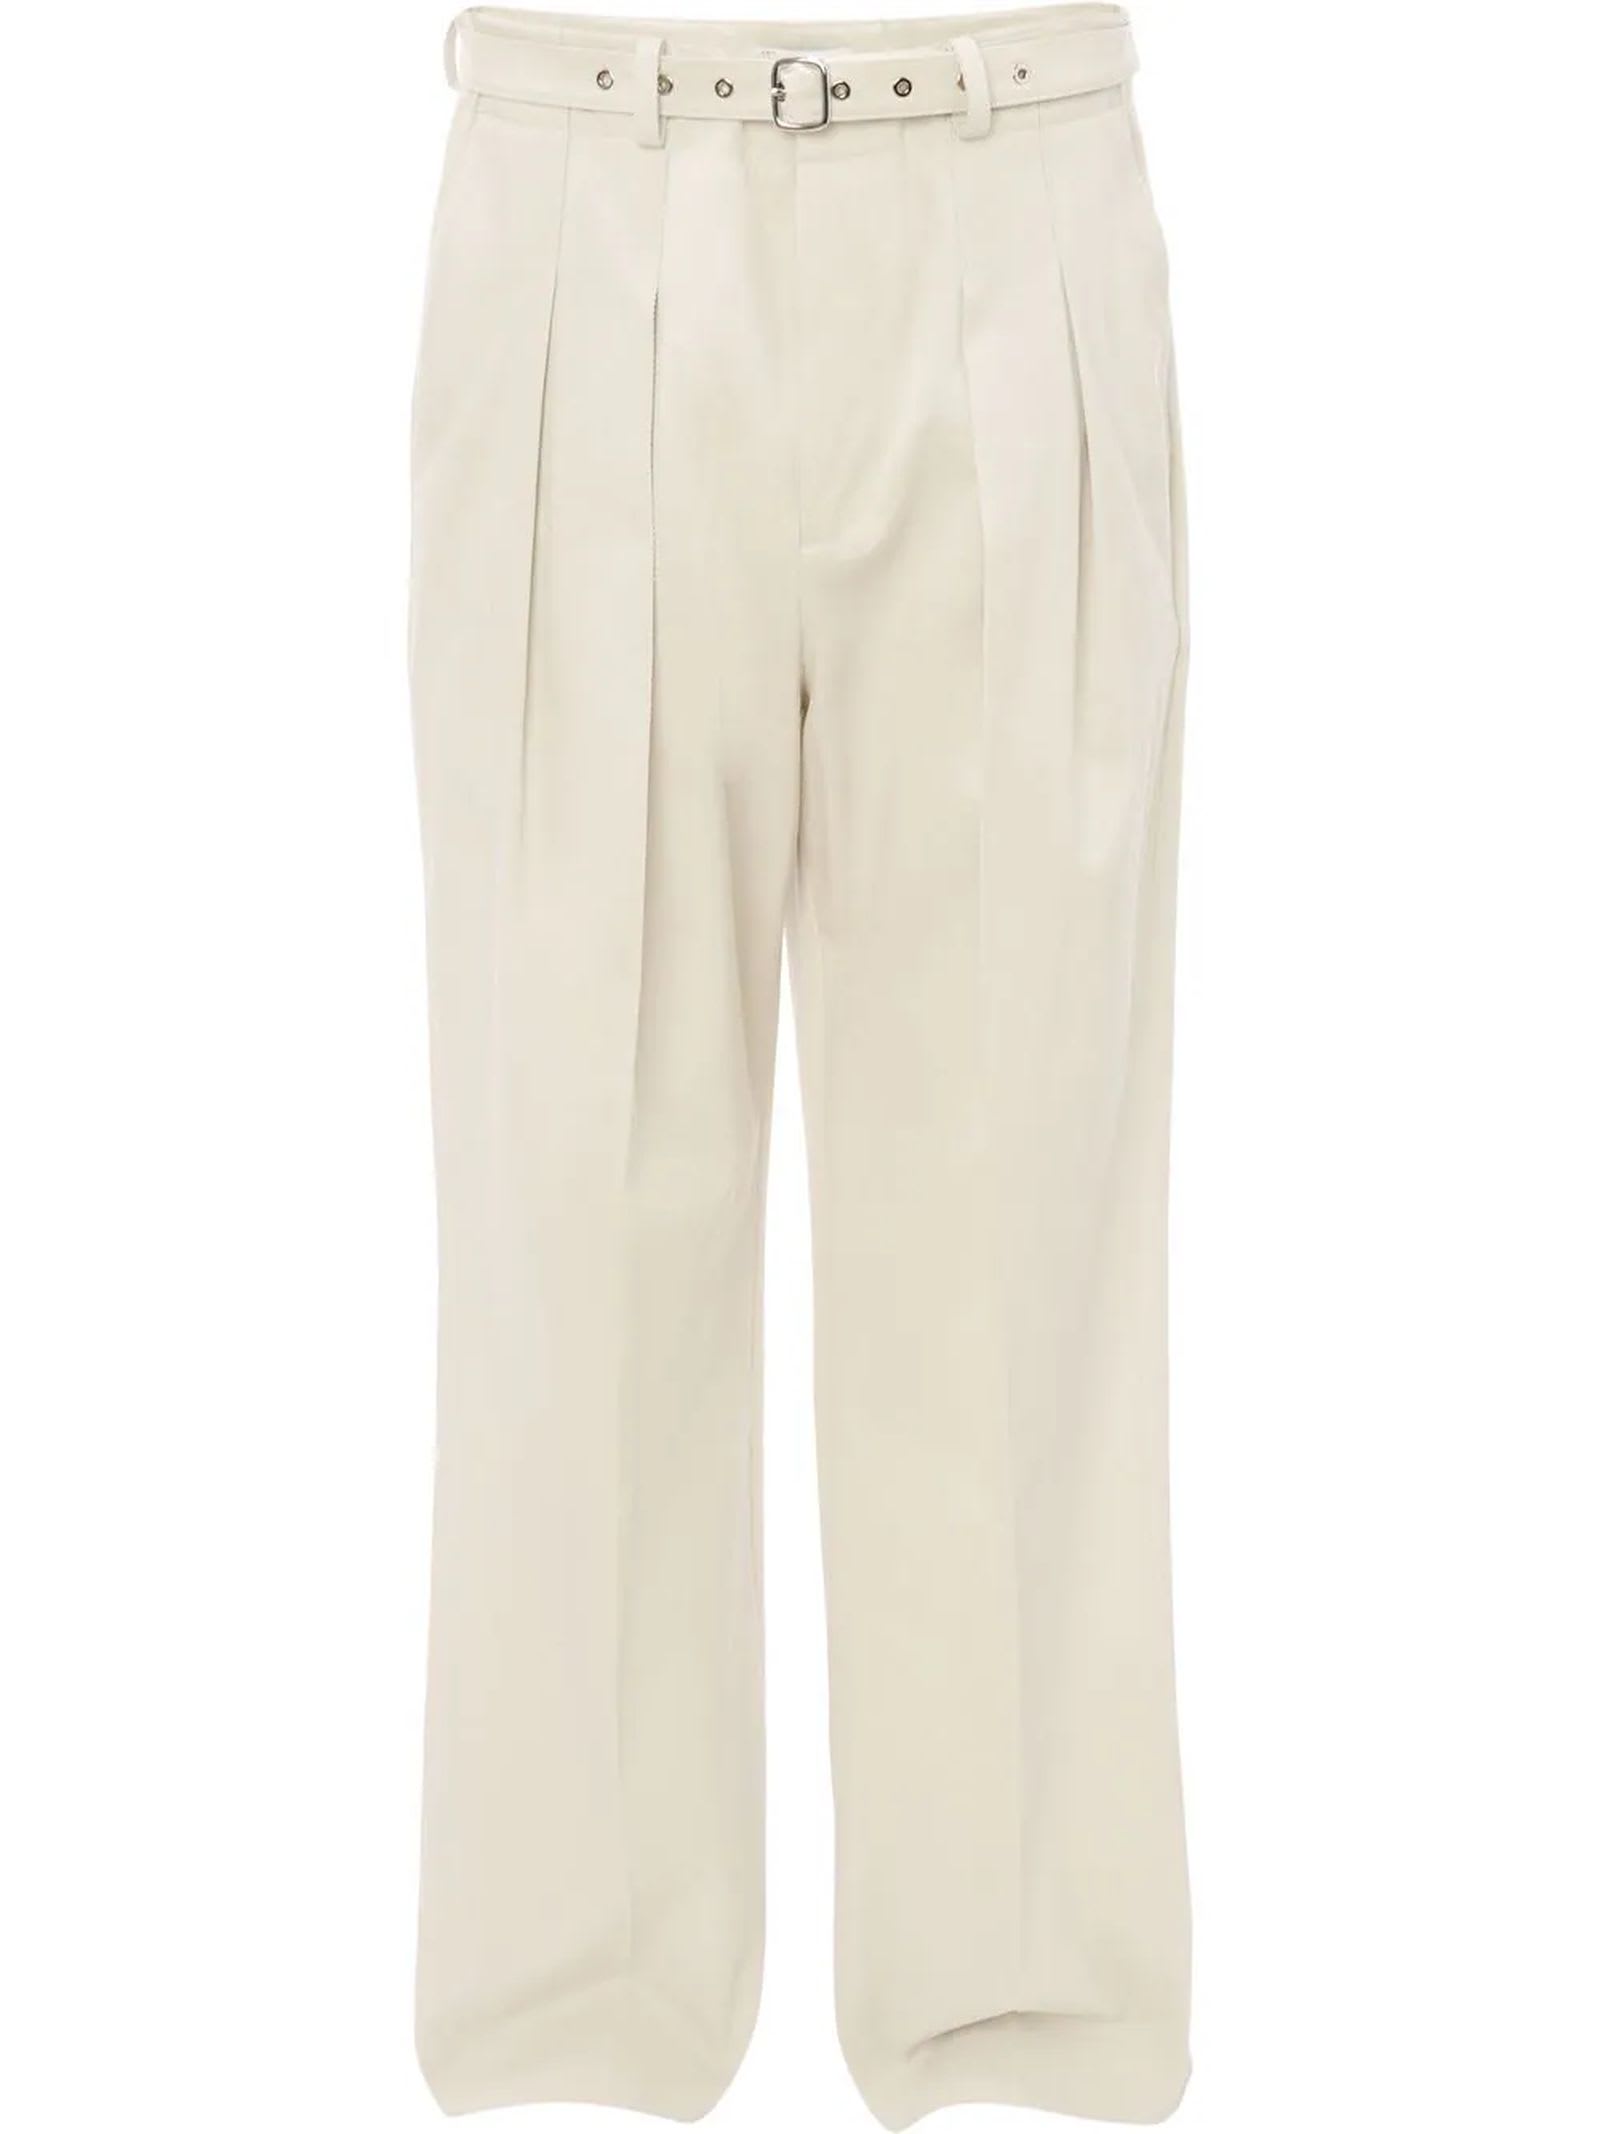 J.W. Anderson Off White Cotton Trousers